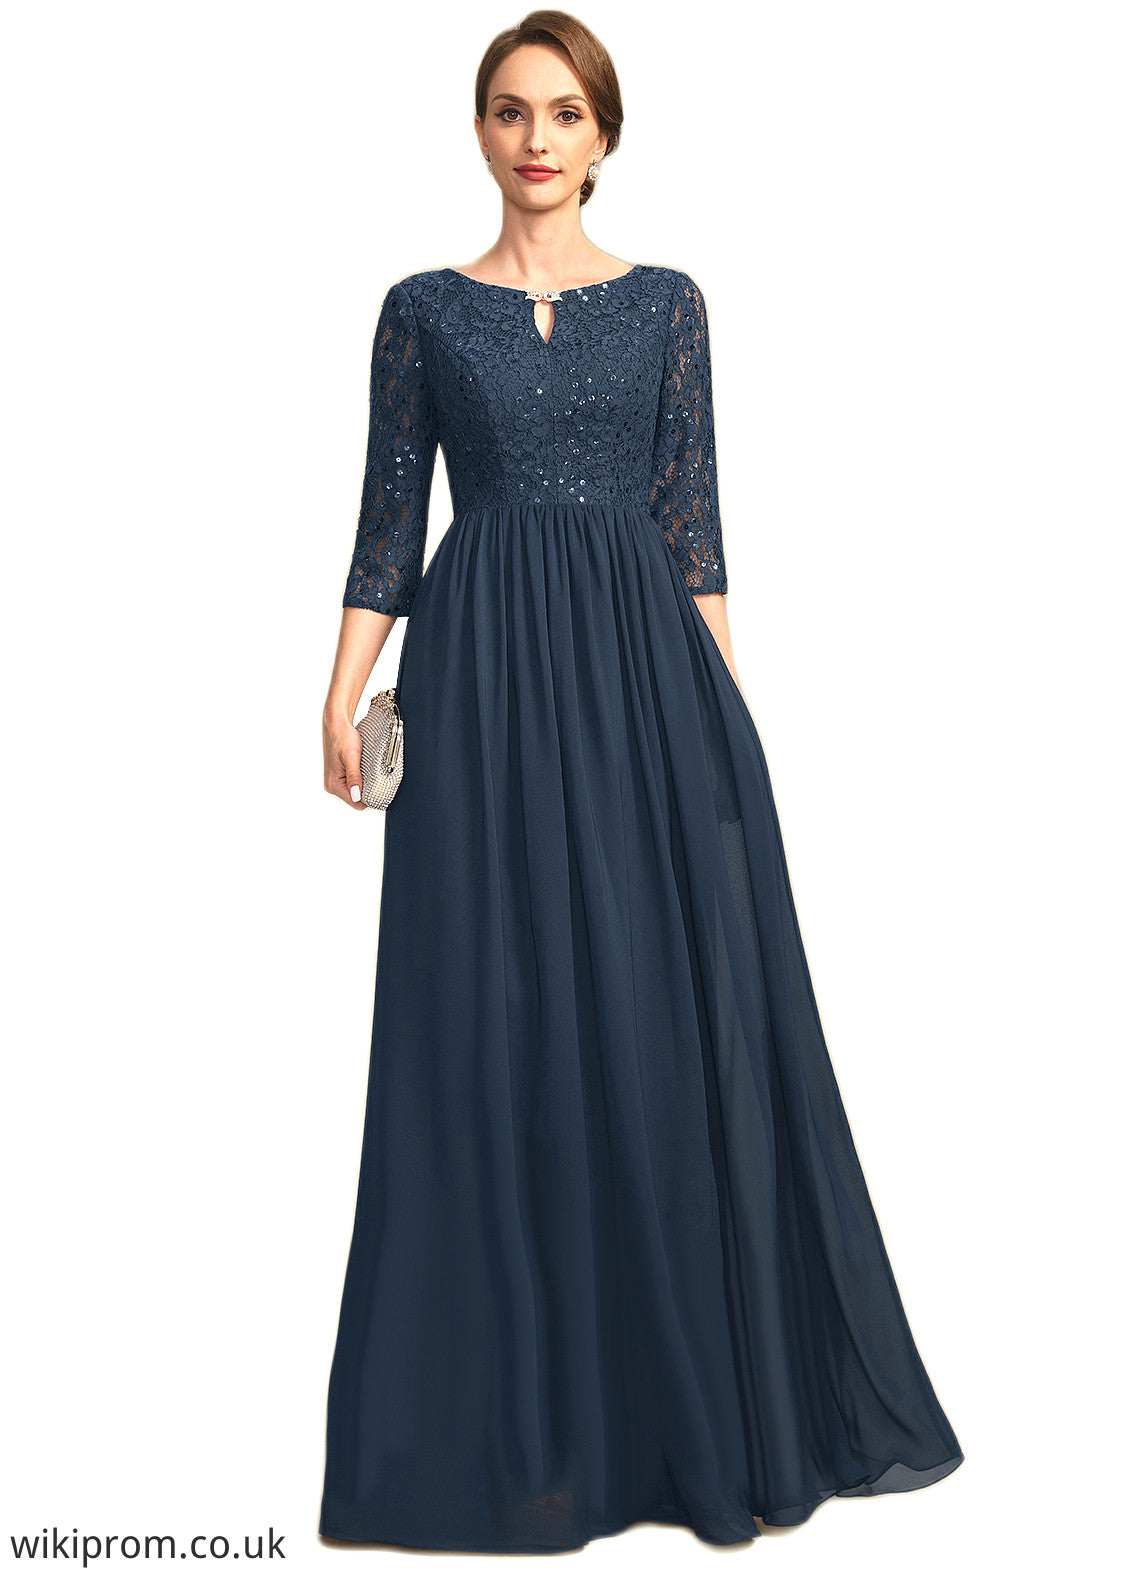 Nora A-line Scoop Floor-Length Chiffon Lace Mother of the Bride Dress With Crystal Brooch Sequins SWK126P0021961